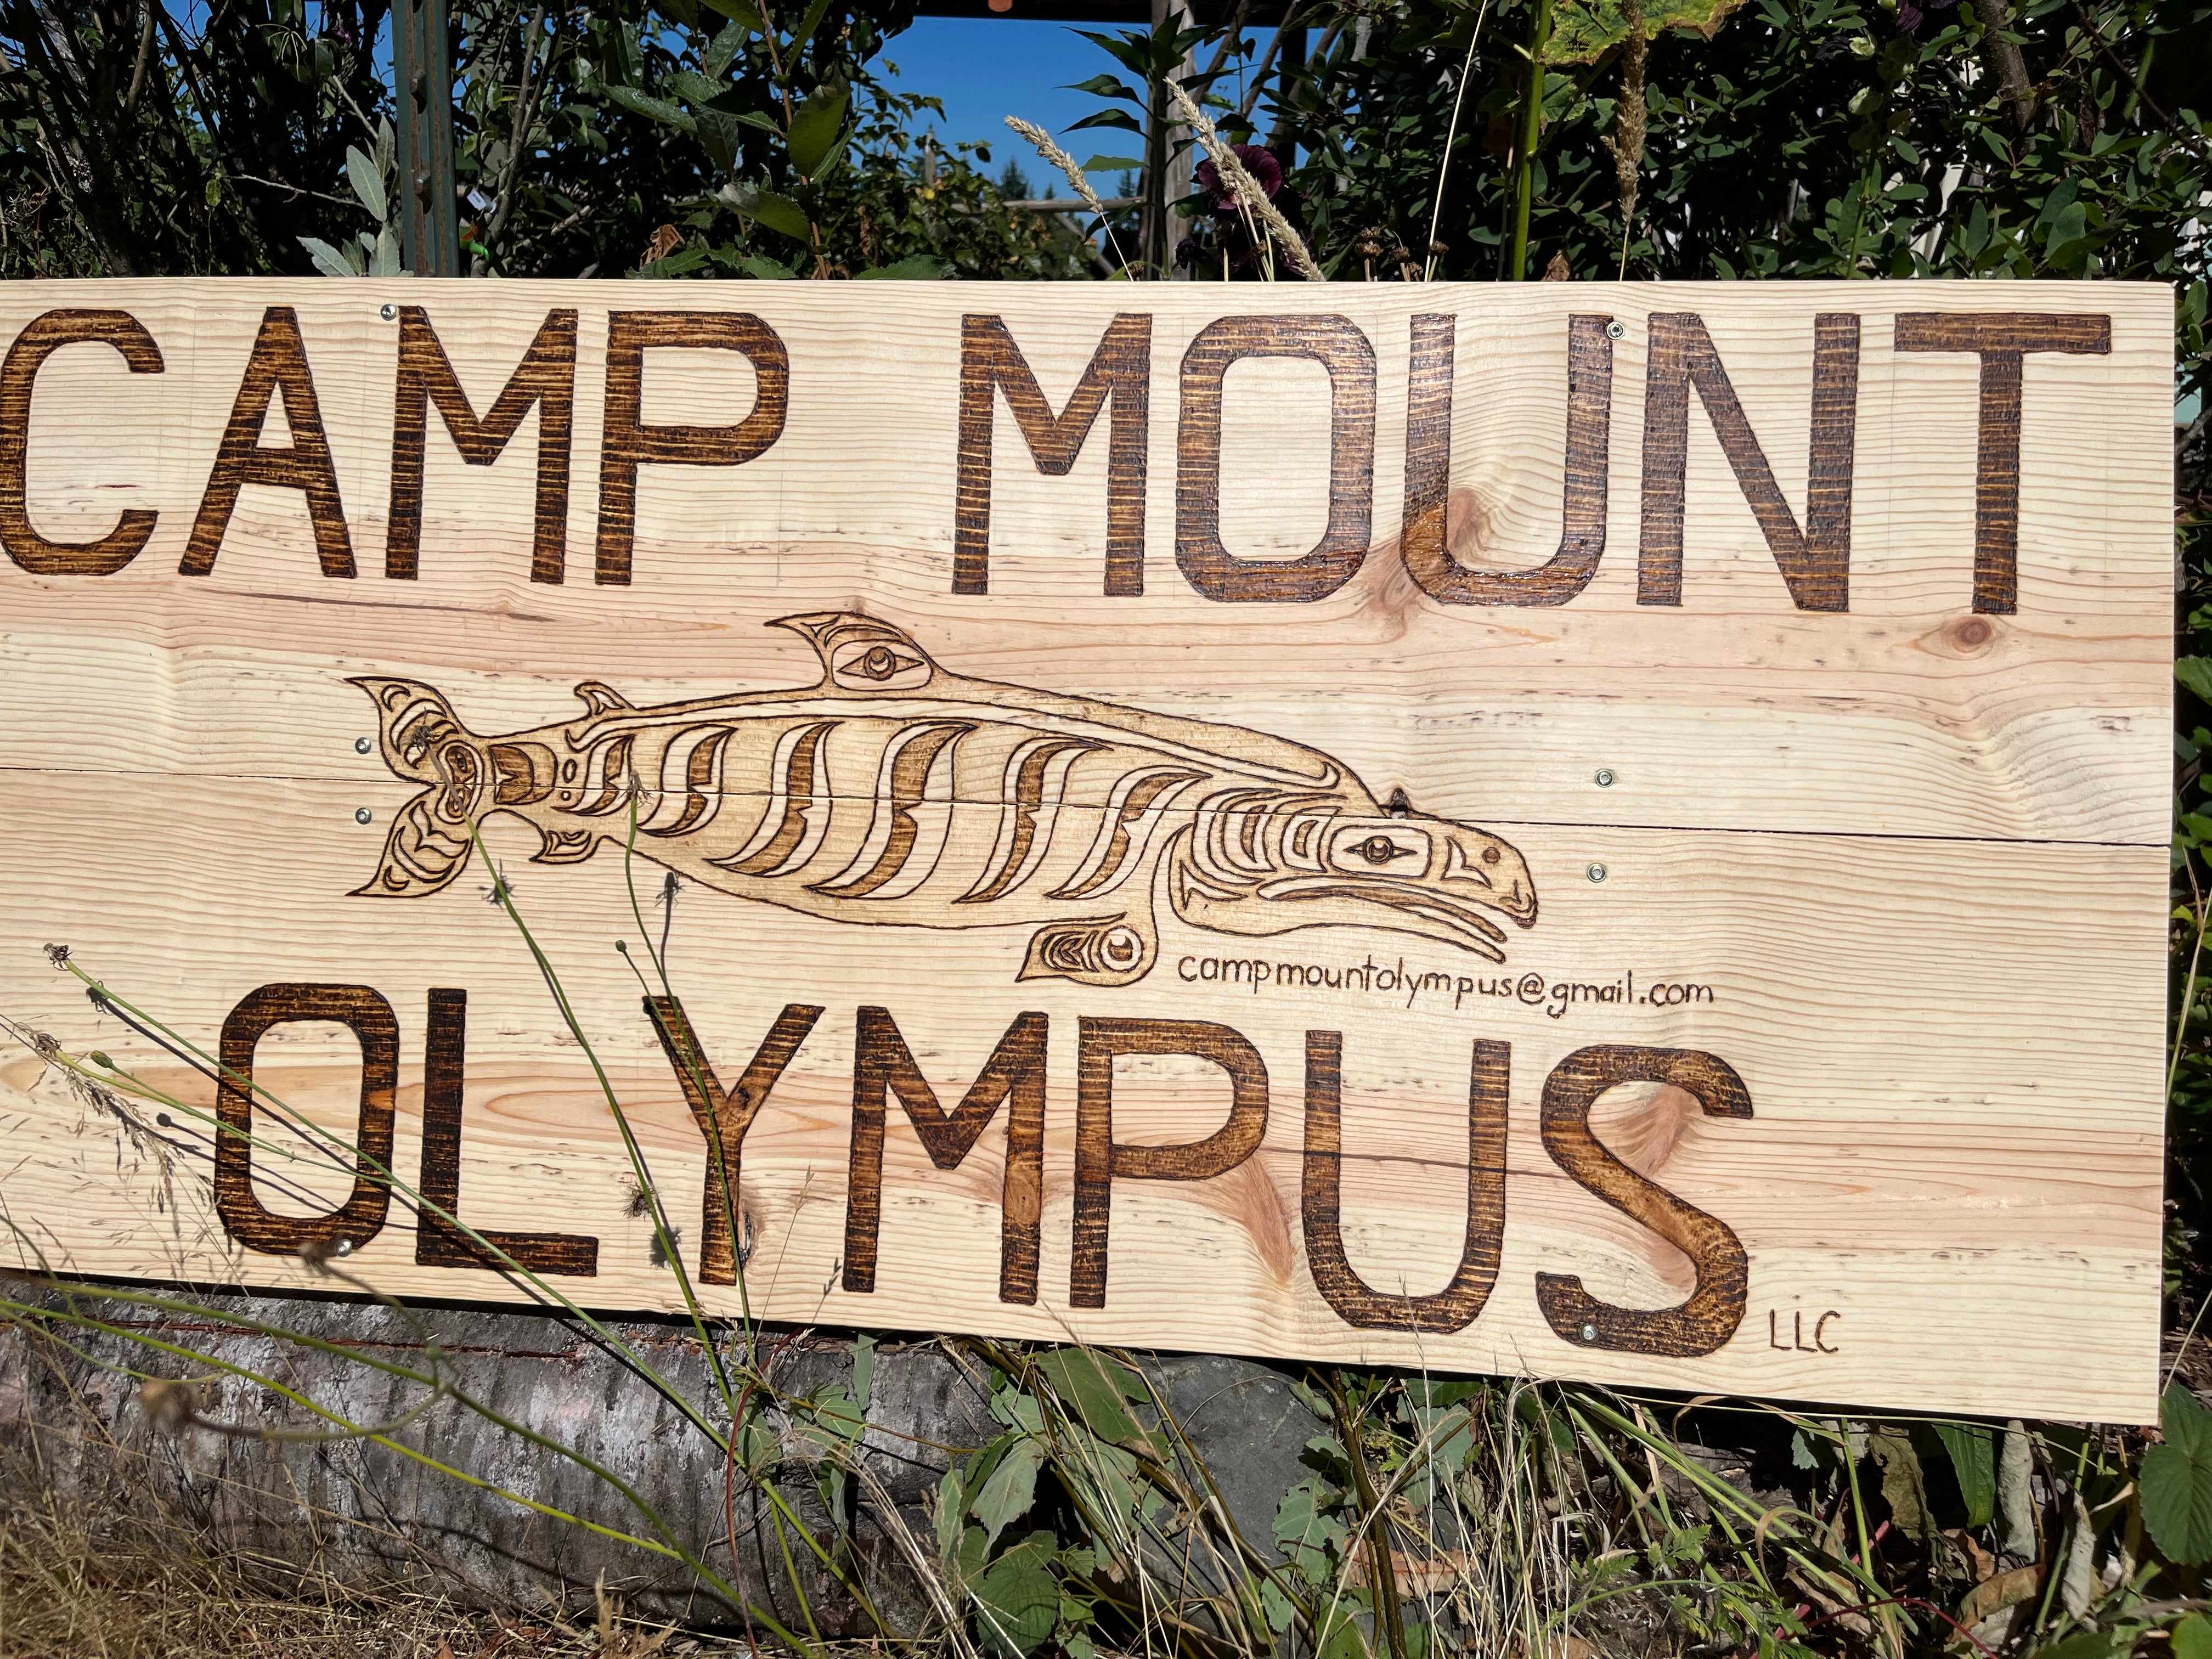 Camper submitted image from Camp Mount Olympus LLC - 1